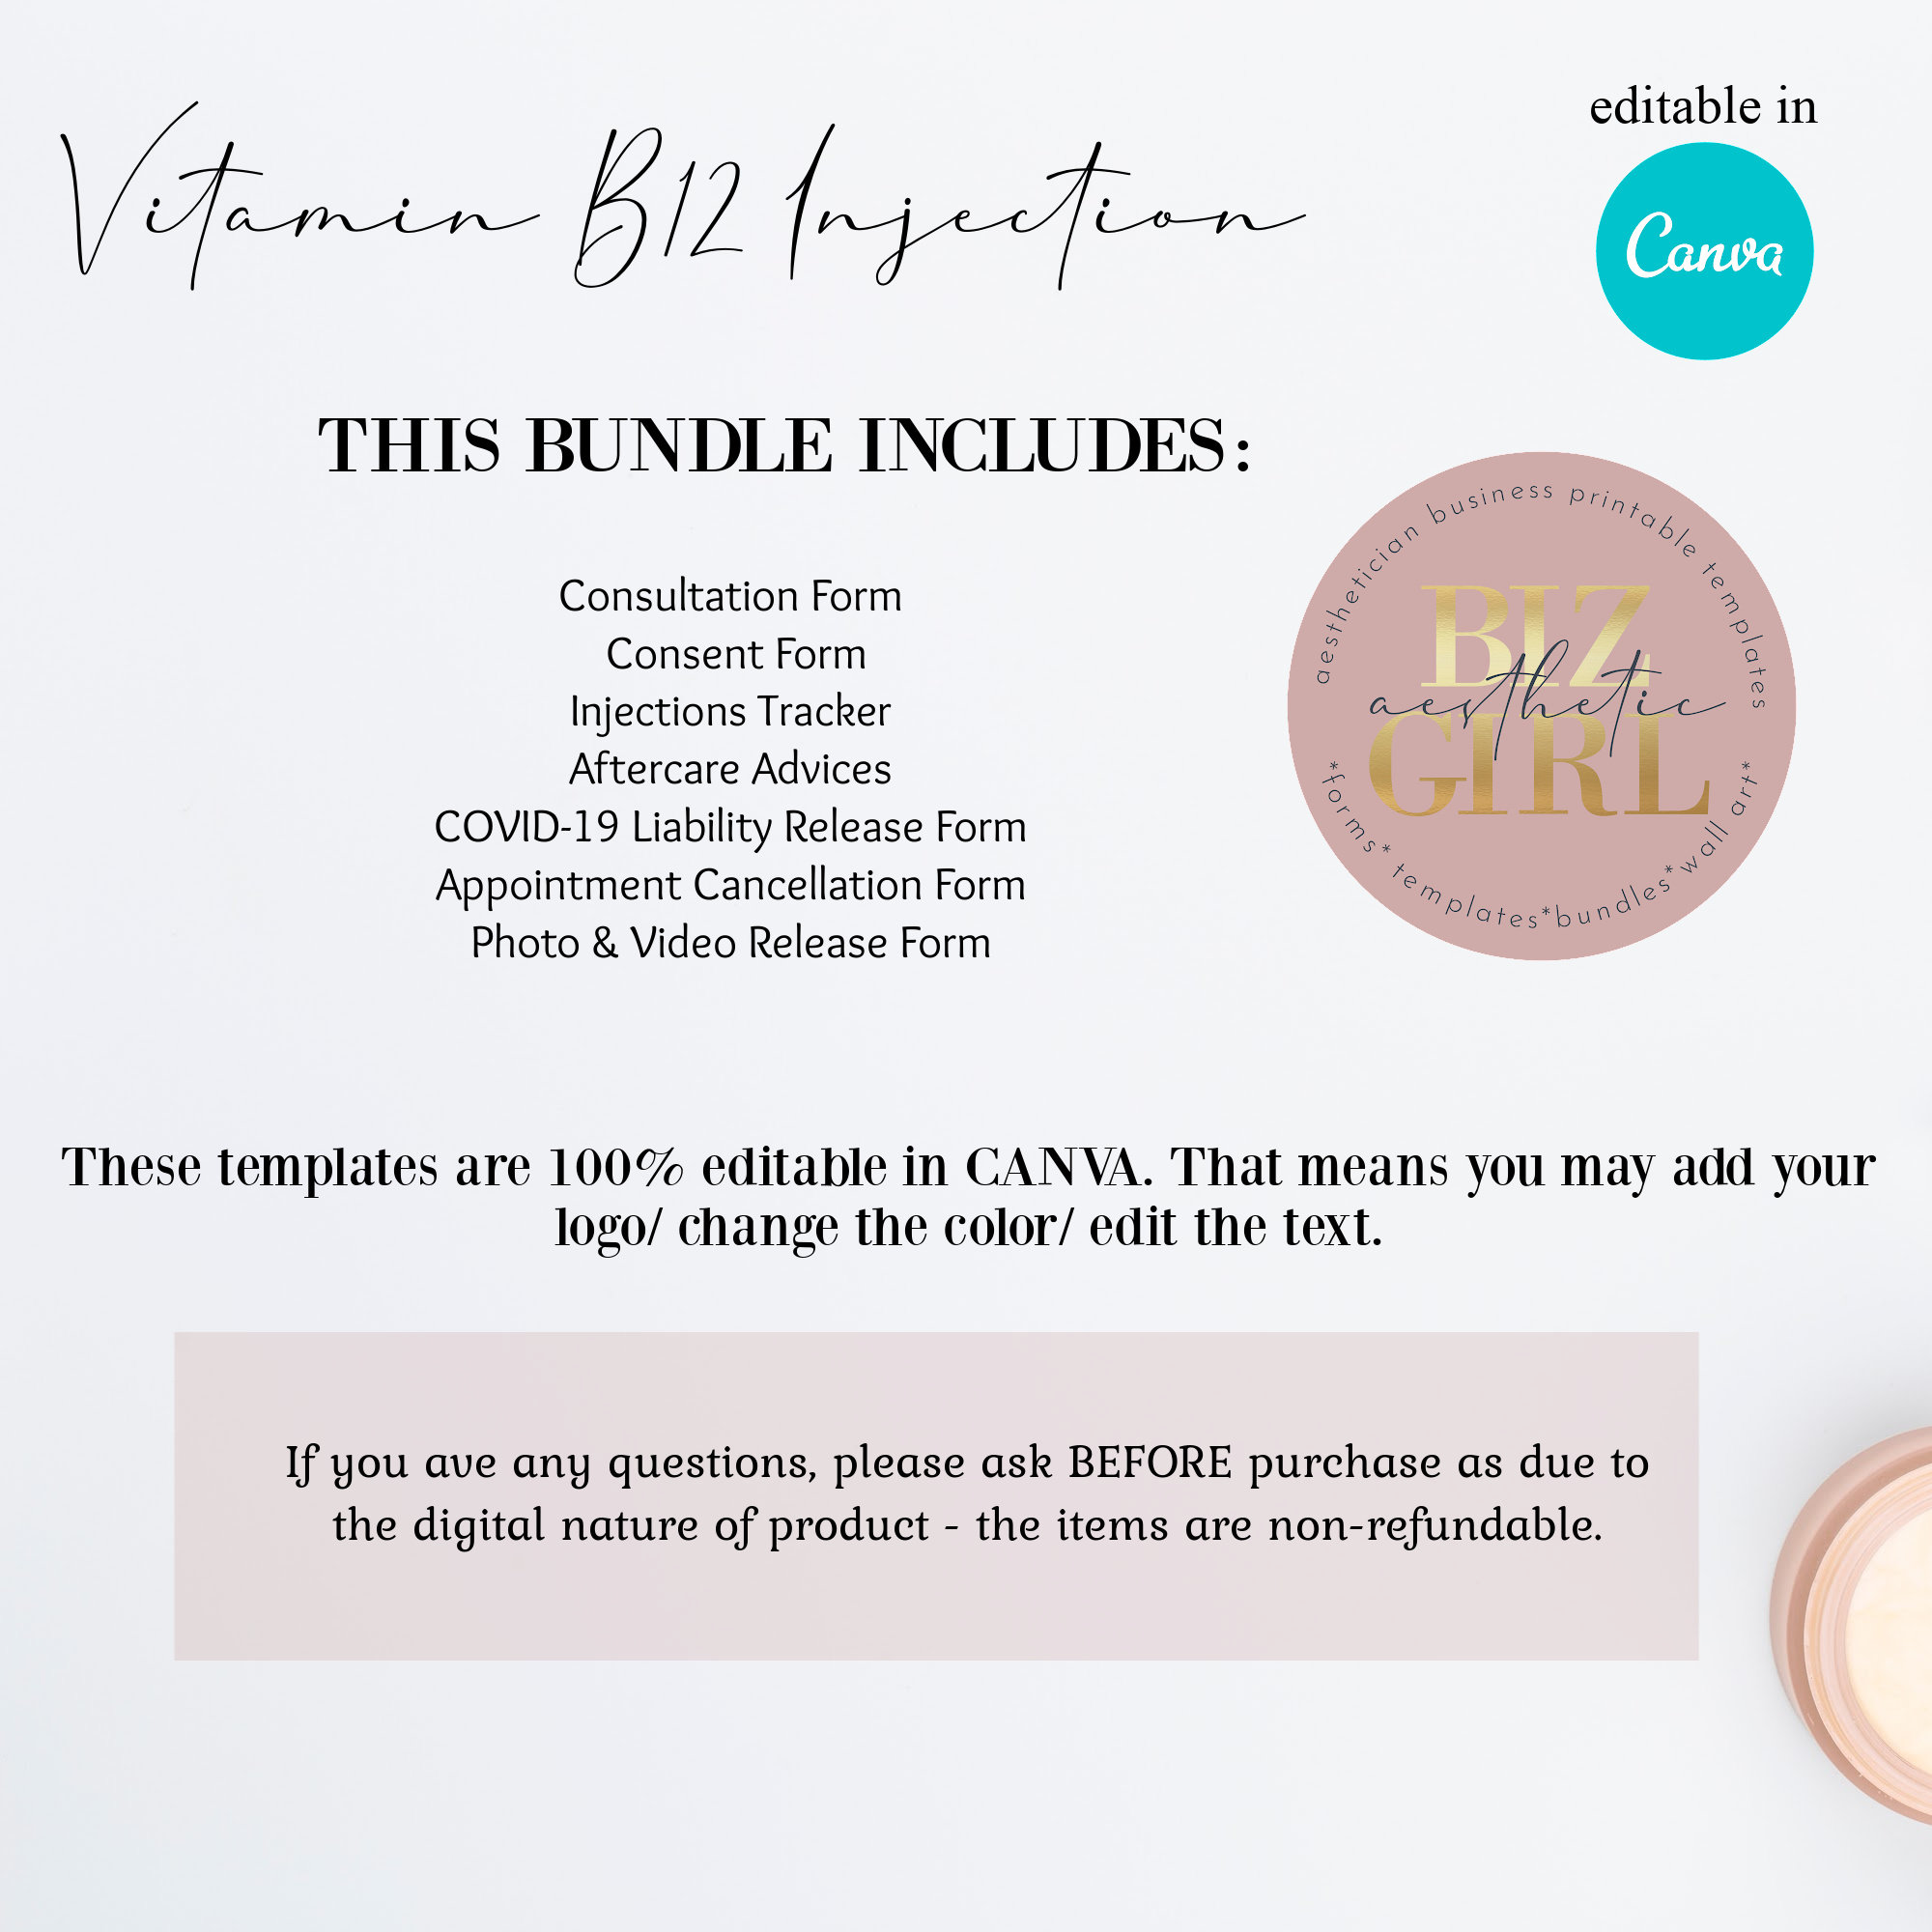 Editable Vitamin B12 Injection Forms B12 Client Intake Form - Etsy